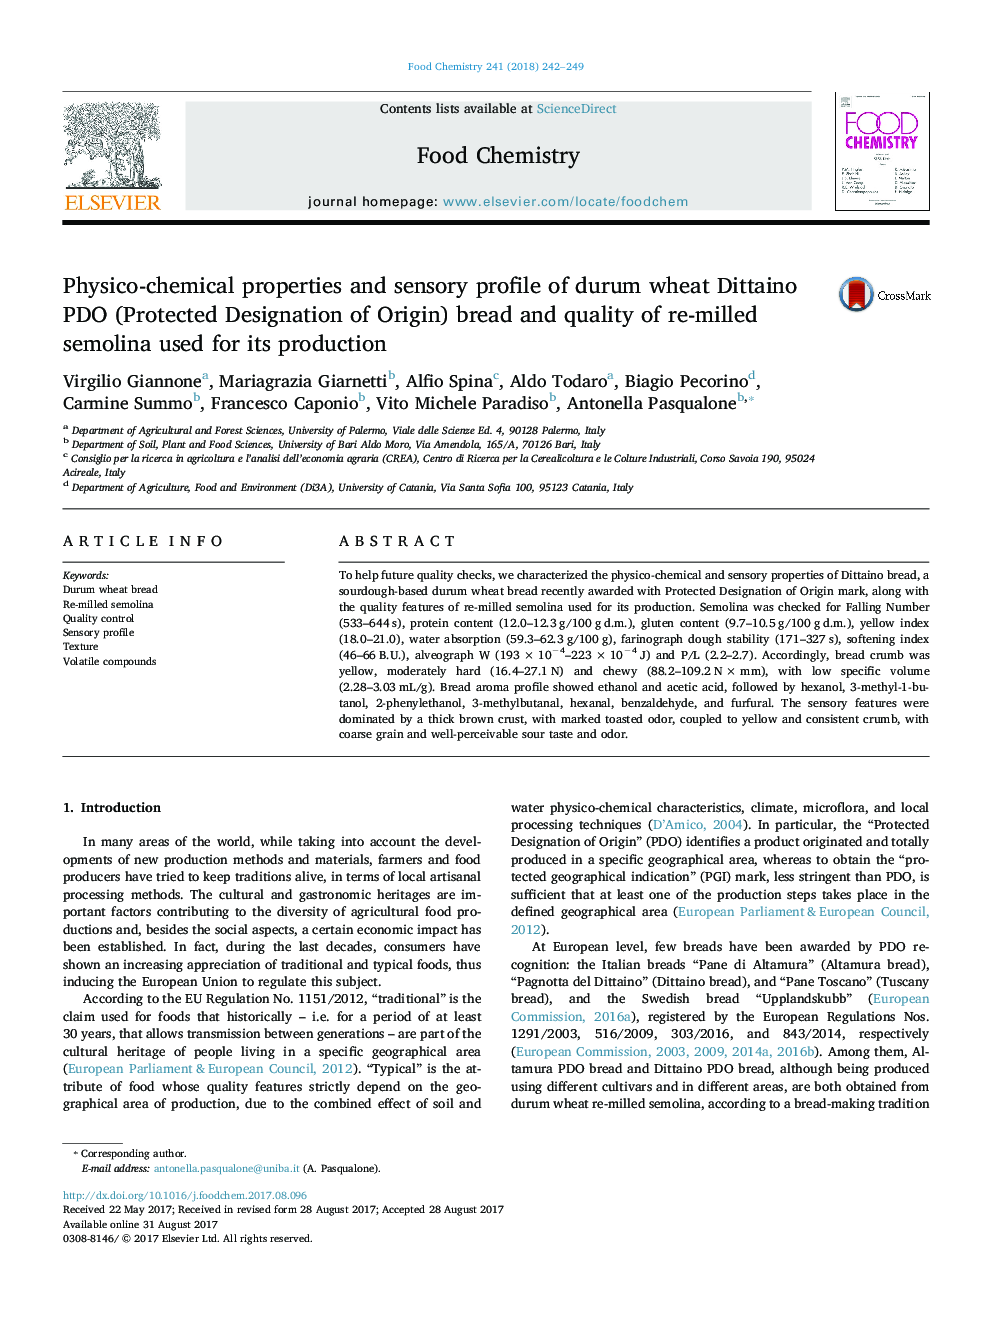 Physico-chemical properties and sensory profile of durum wheat Dittaino PDO (Protected Designation of Origin) bread and quality of re-milled semolina used for its production